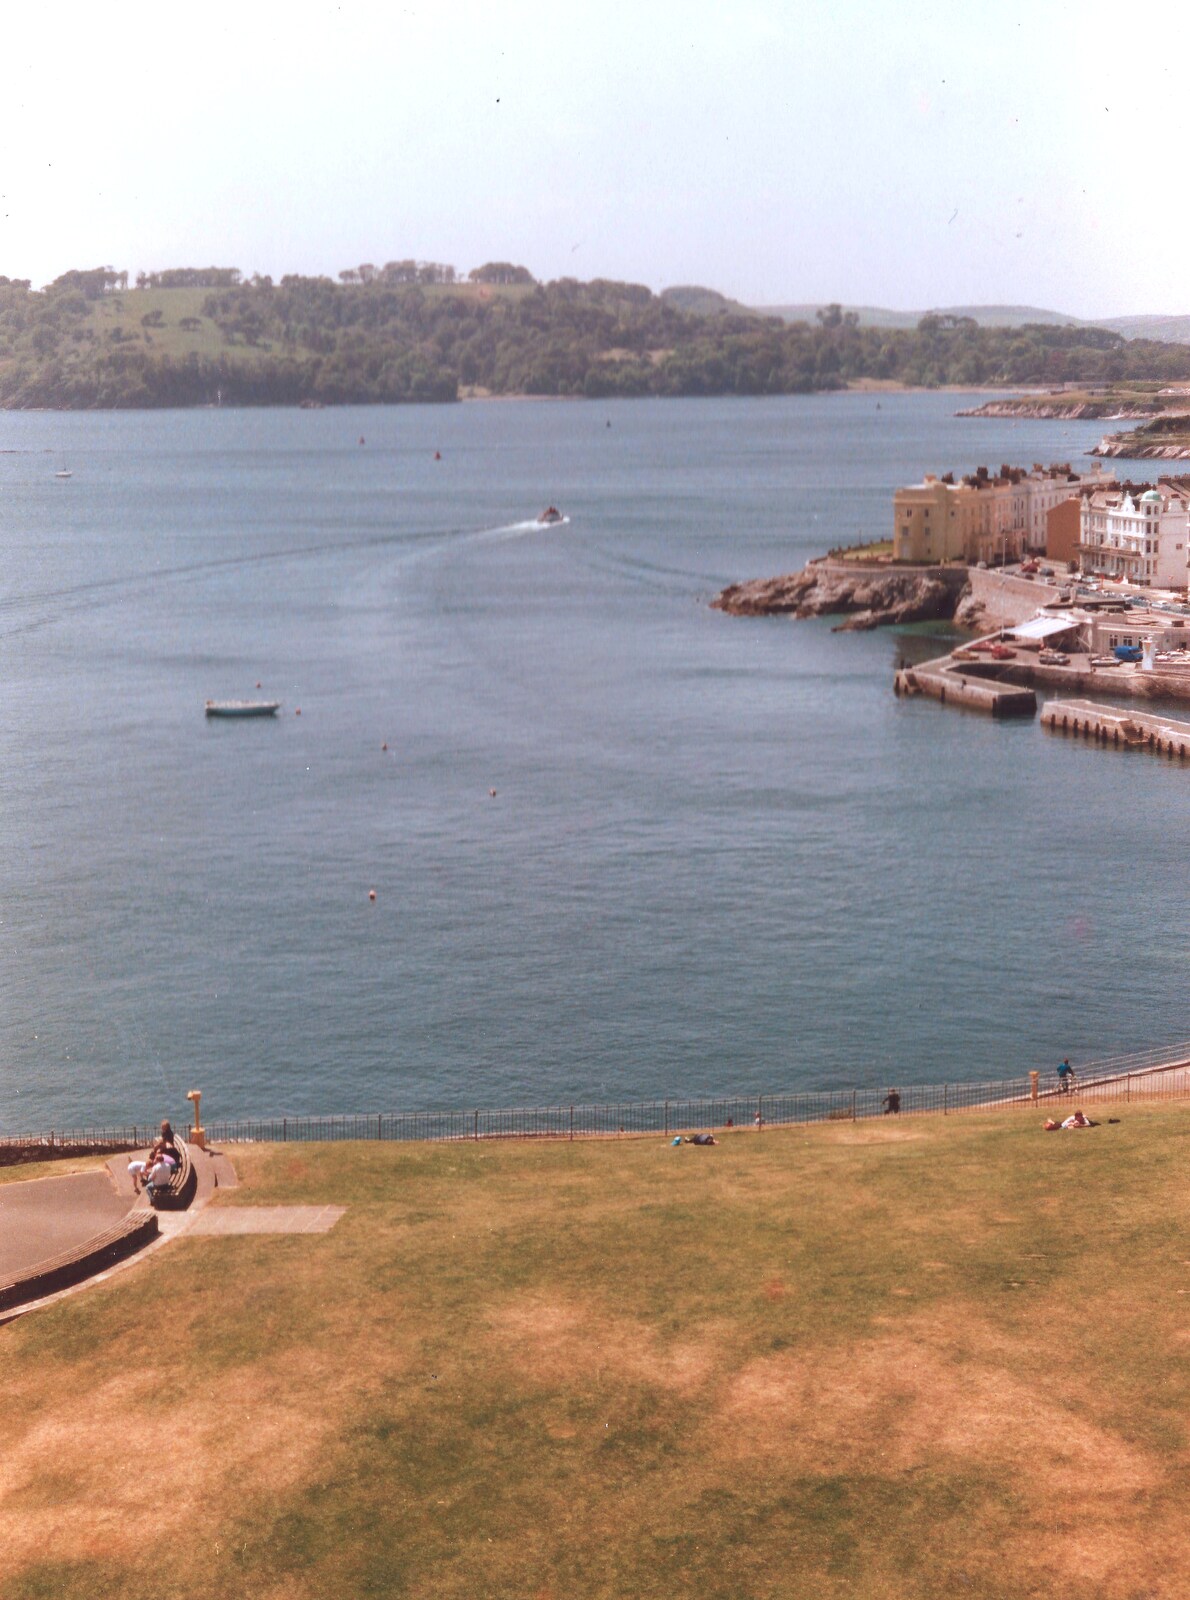 Parched grass on the Hoe and West Hoe from Aerial Scenes of Plymouth, Devon - 28th June 1987